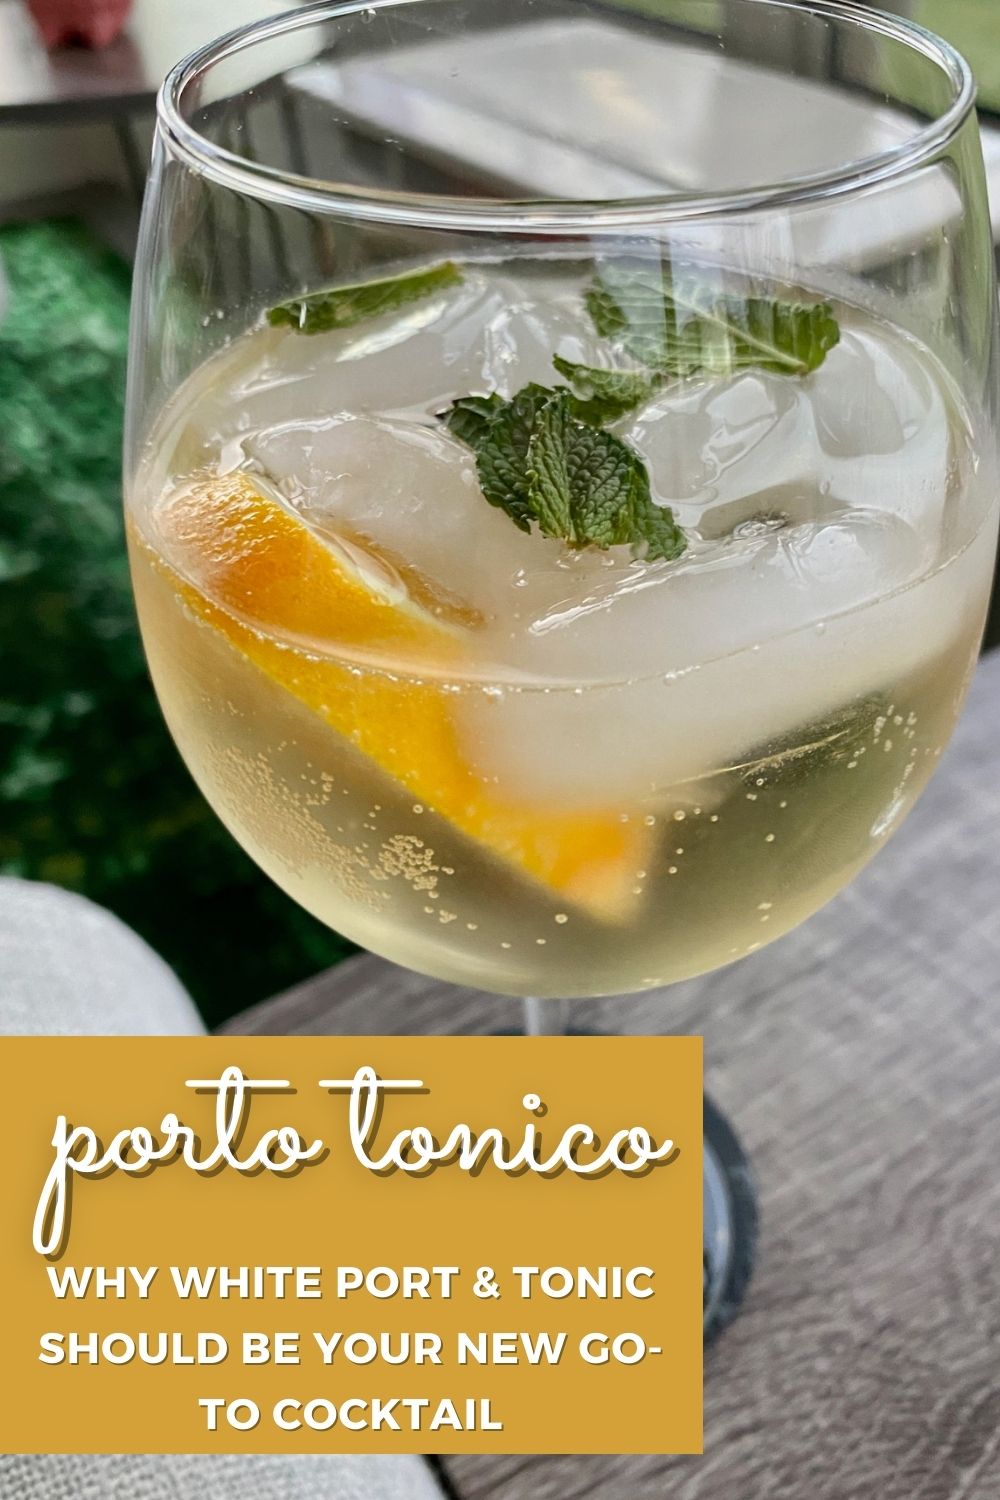 Porto Tonico: Why White Port & Tonic Should Be Your New Favorite Cocktail | A white port & tonic (a.k.a. porto tonio or portonica) is the refreshing and complex cocktail you didn't know you needed. Perfect for sipping any time of year, and super easy, it's Portugal's answer to the aperol spritz or gin & tonic. #whiteport #port #tonic #cocktail